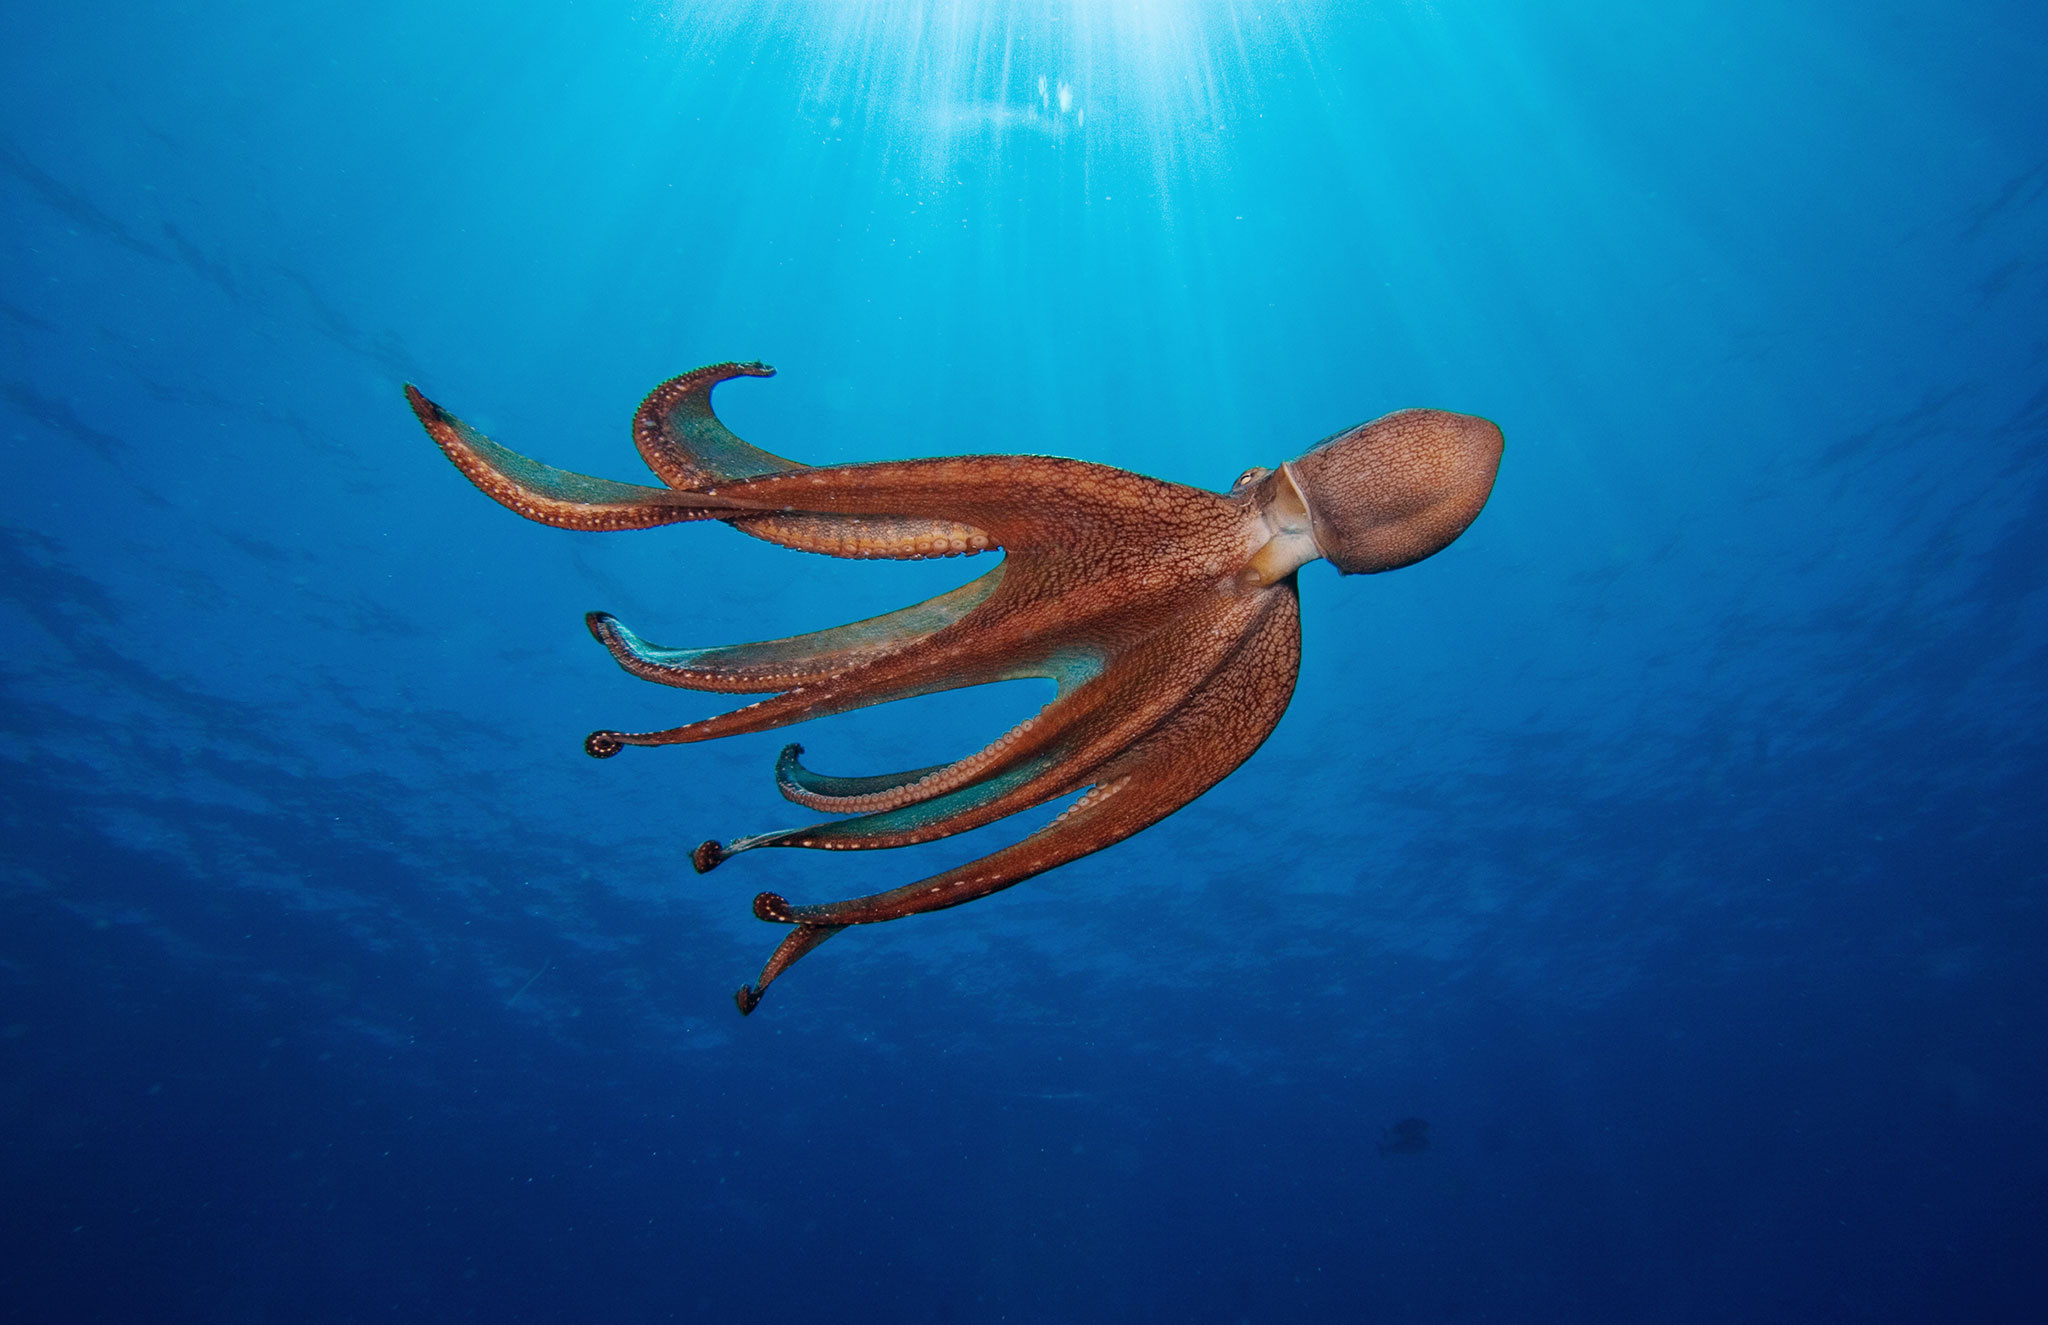 HQ octopus wallpapers, Photographic excellence, Vivid cephalopod pictures, Stunning animal wallpapers, 2050x1330 HD Desktop